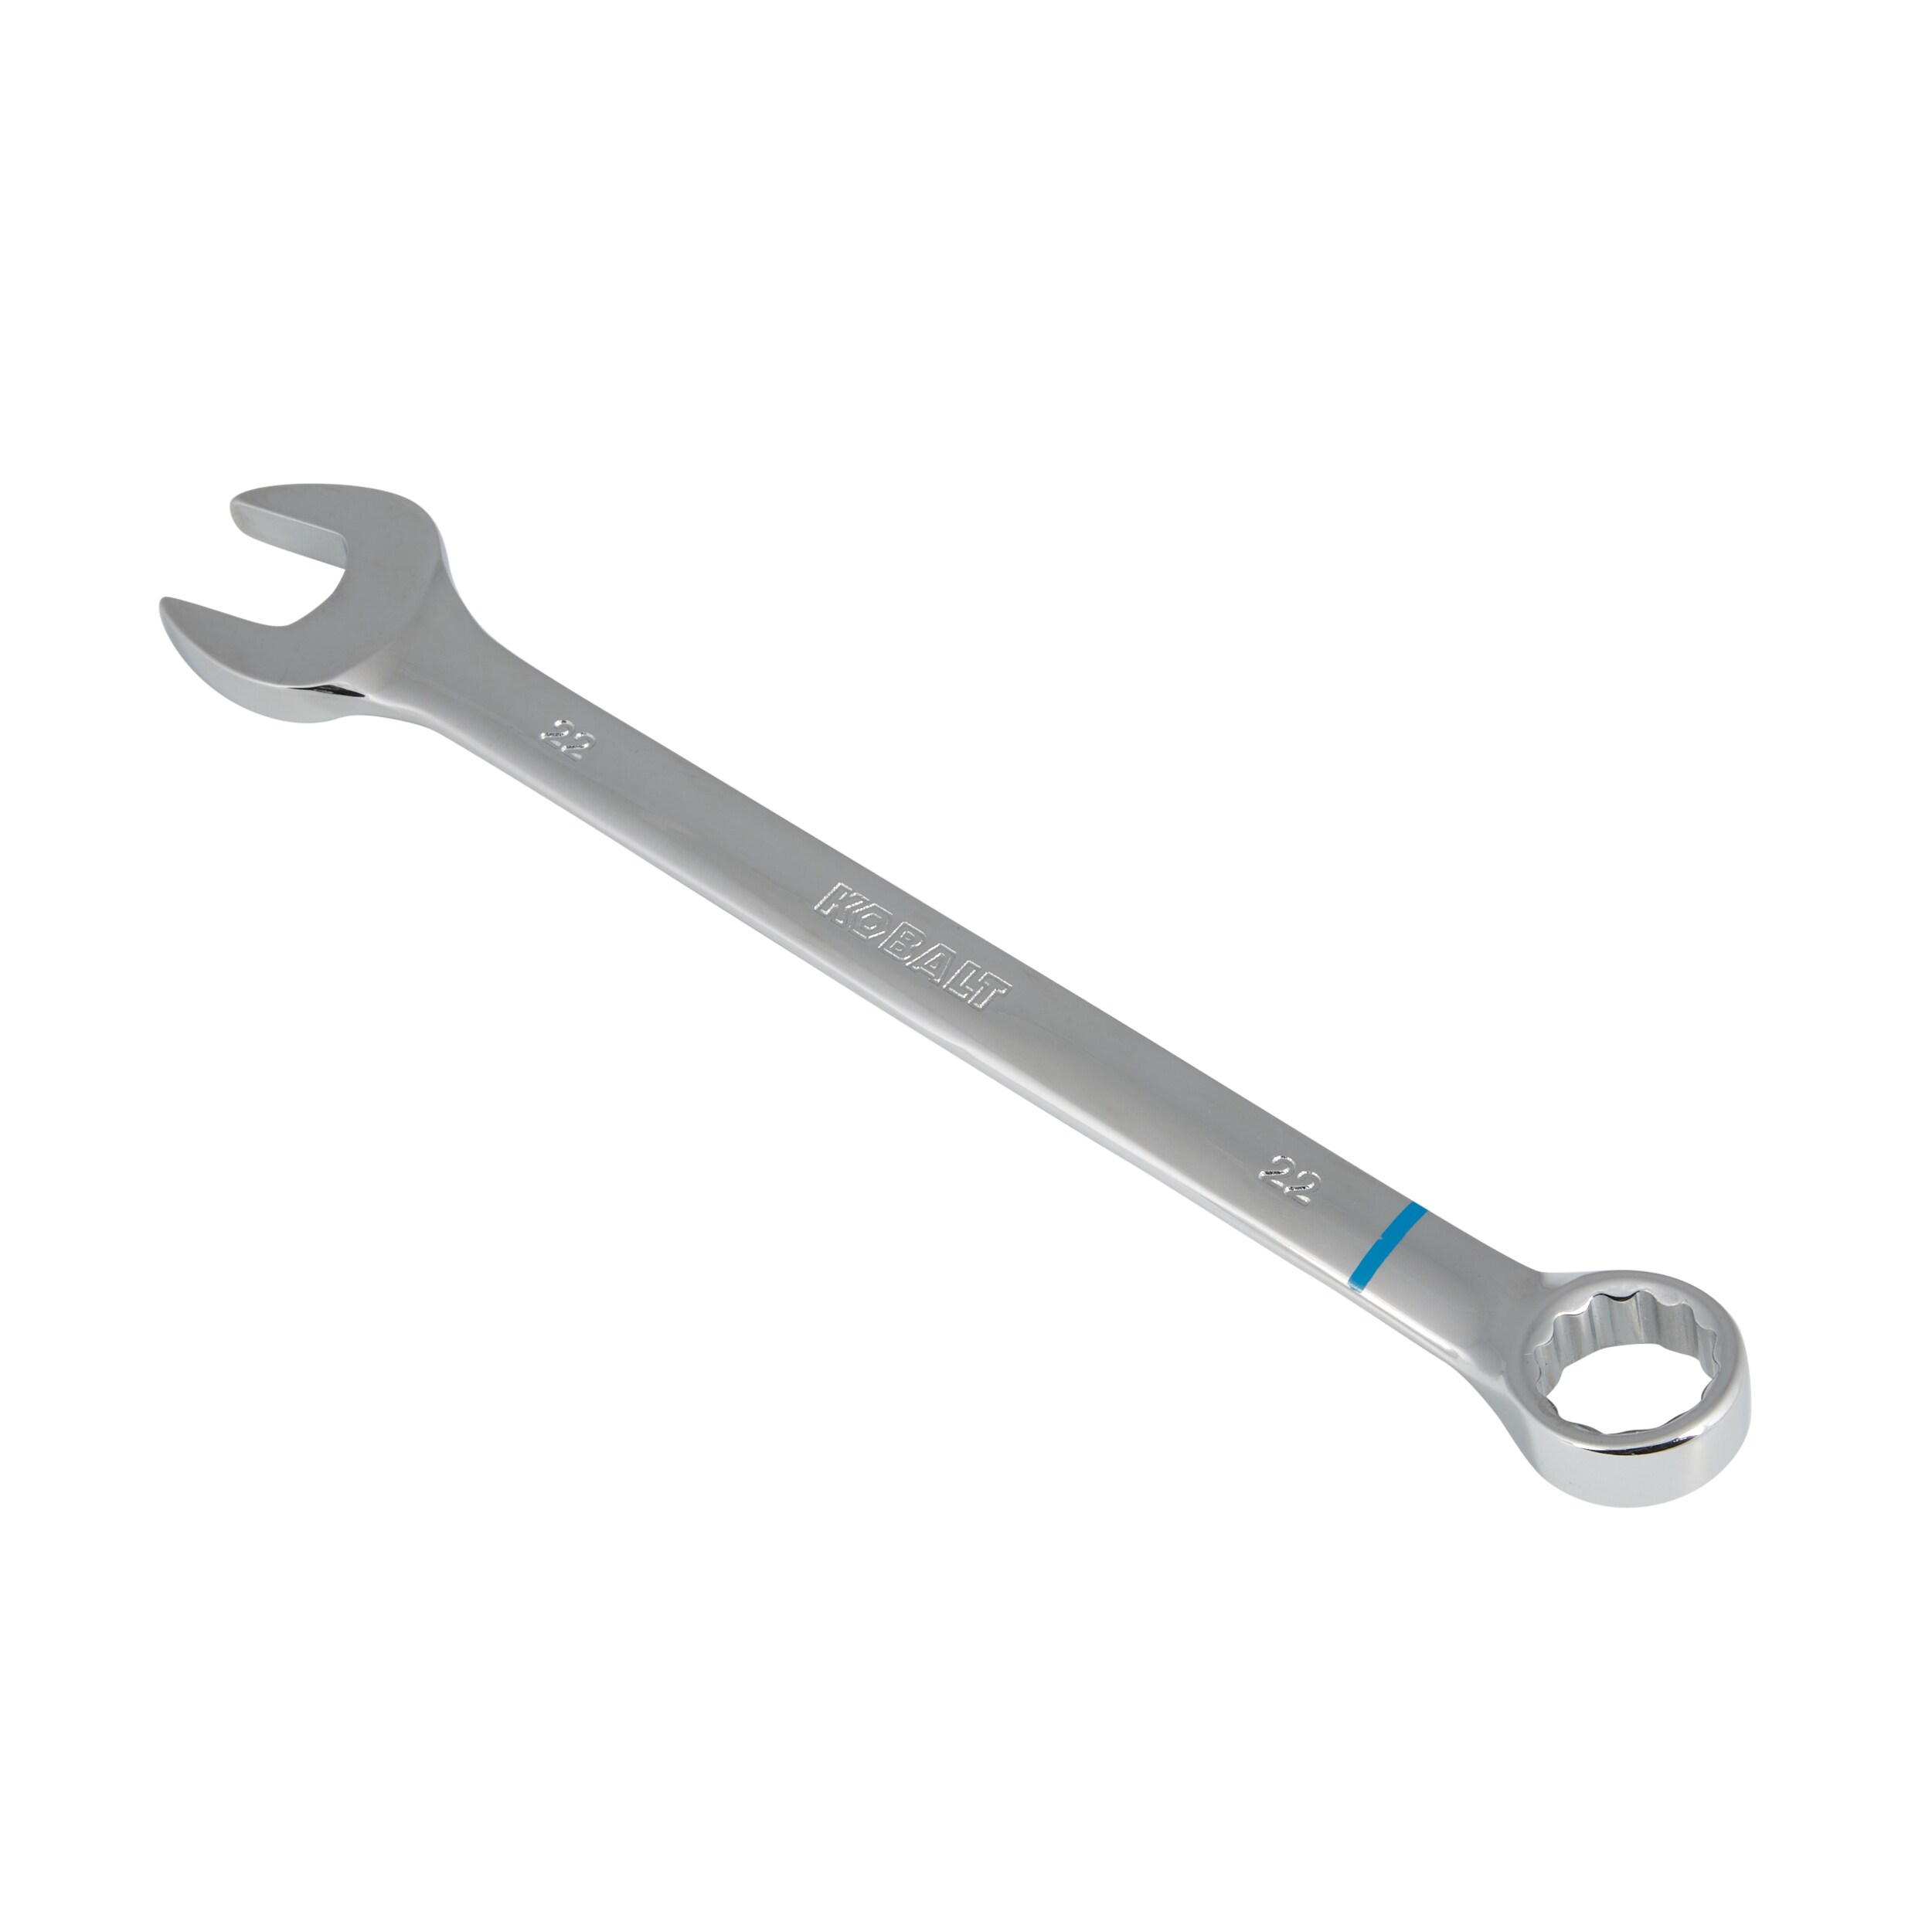 Kobalt 22mm 12-point Metric Standard Combination Wrench at Lowes.com